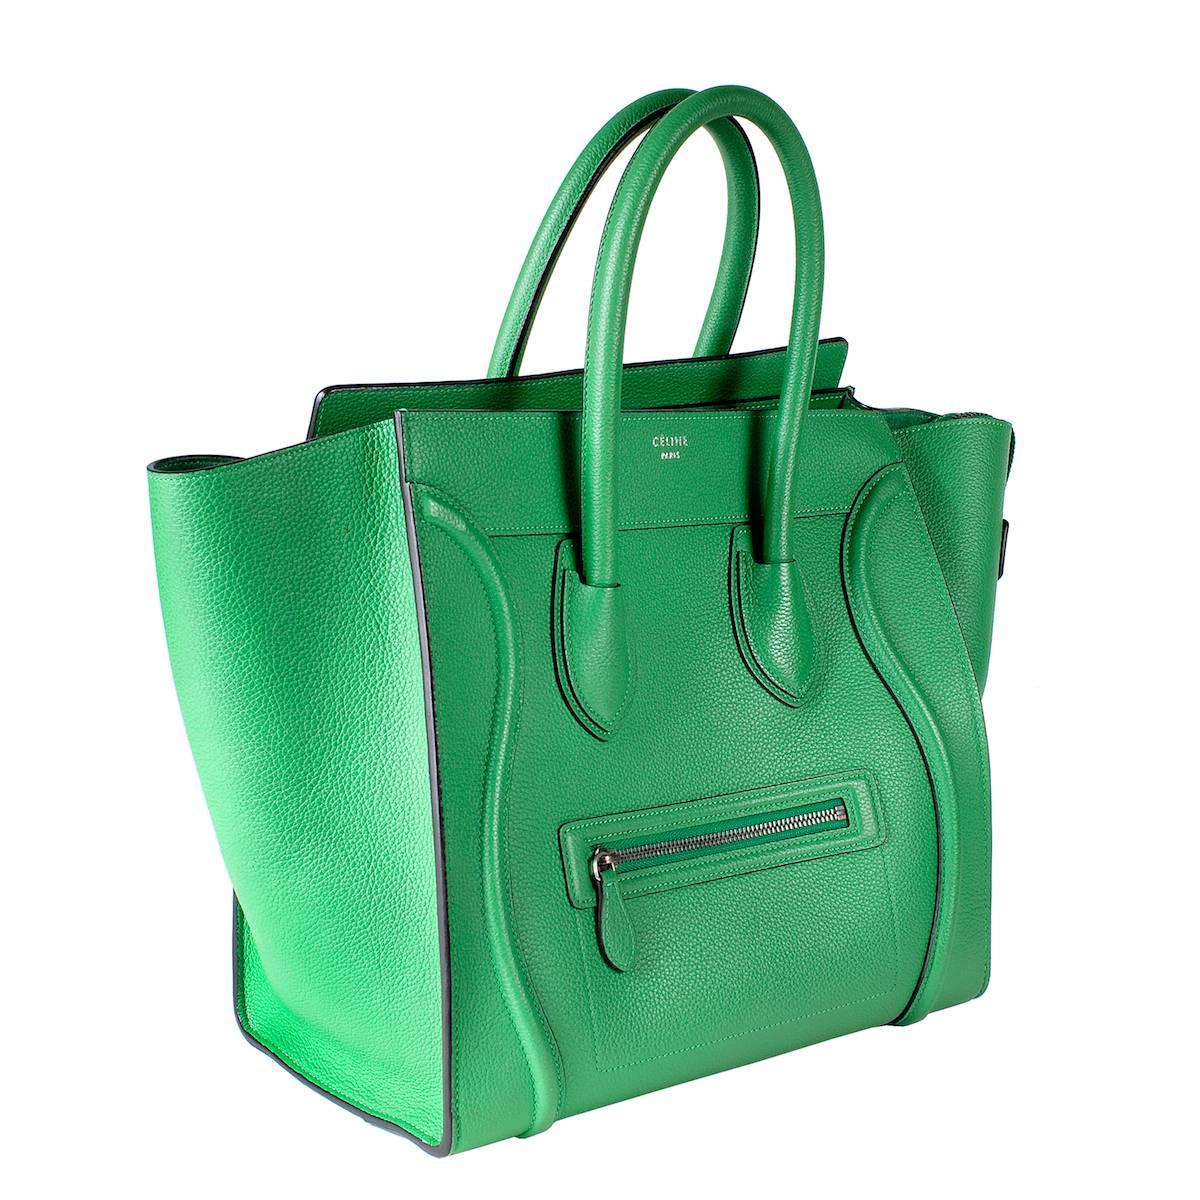 Leather phantom tote by Celine in green.  

Dimensions:  11.75